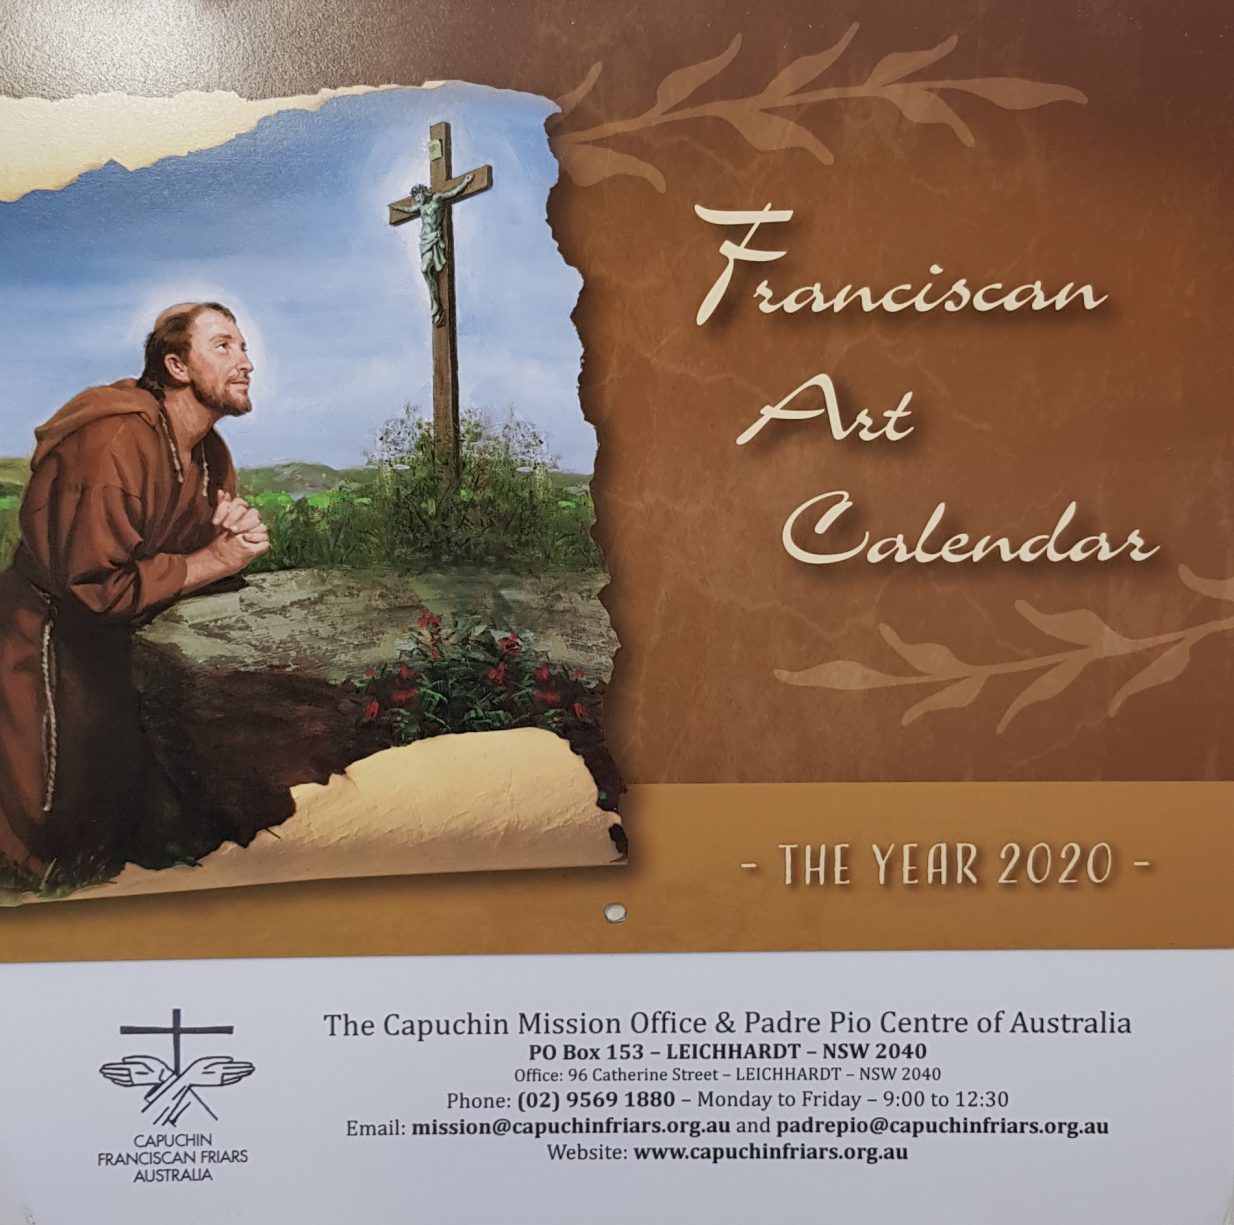 ST FRANCIS CALENDAR The Capuchin Mission Office